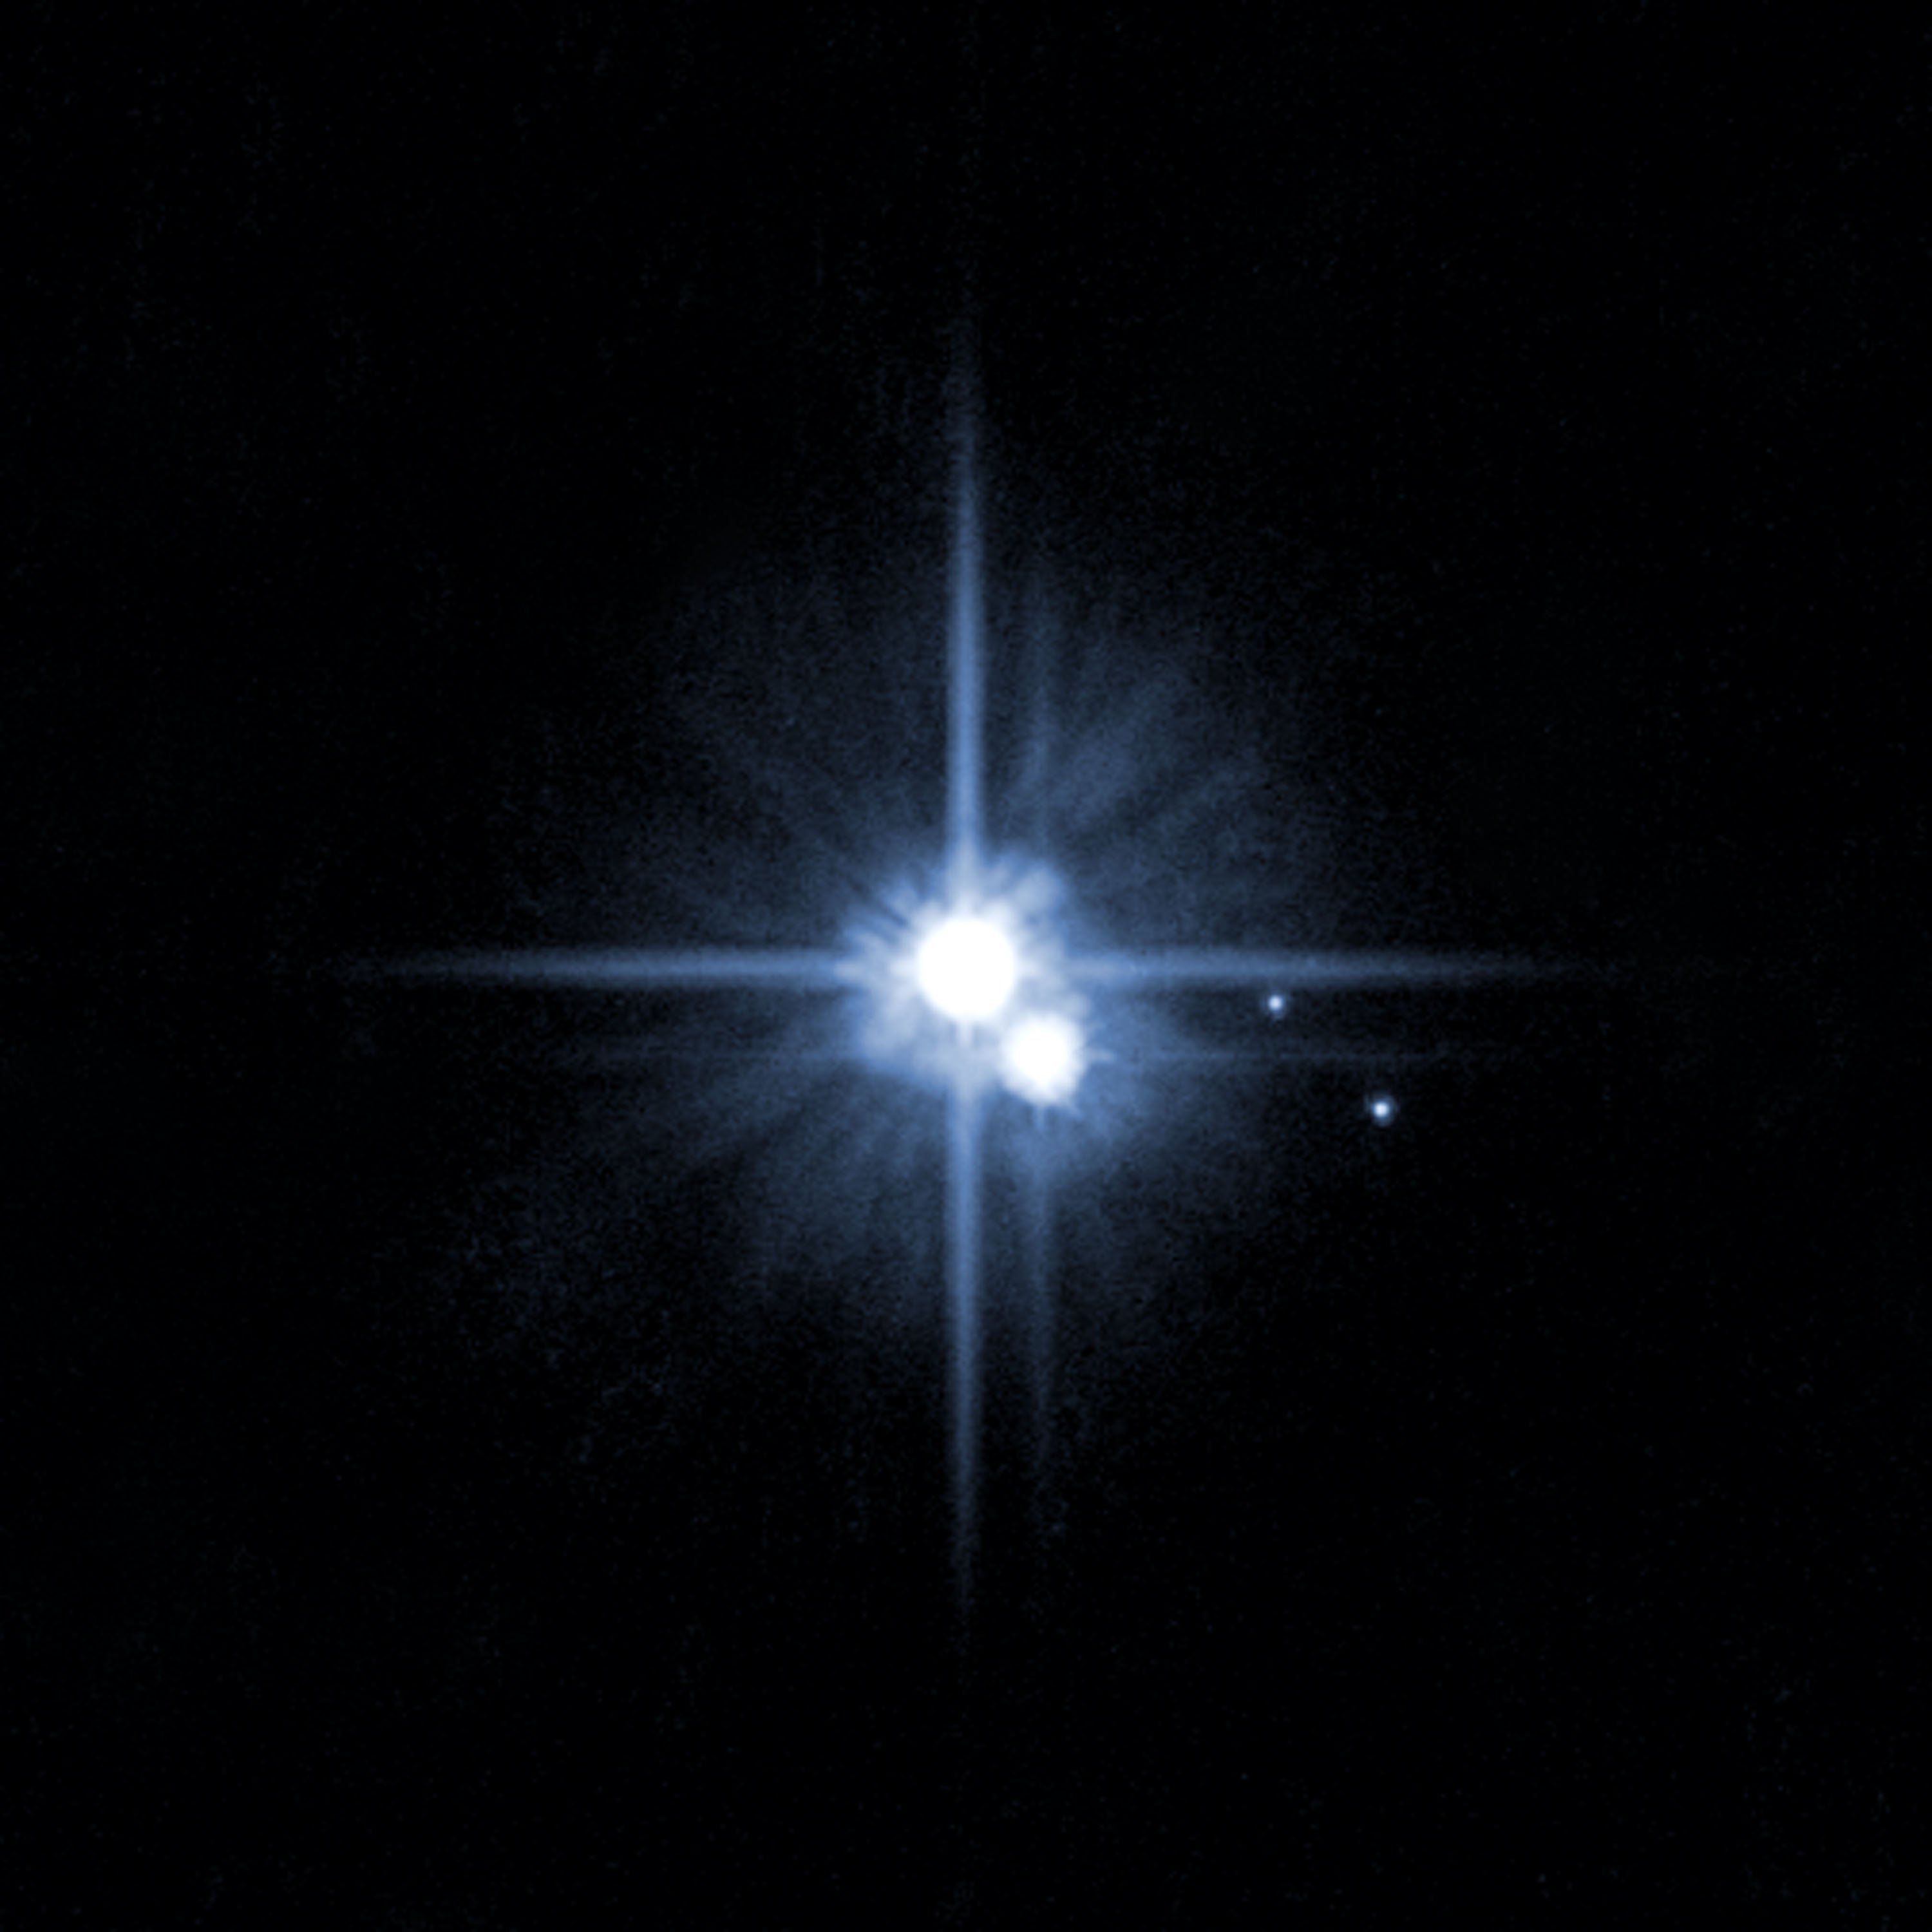 Pluto and three of its moons, photographed by the Hubble Space Telescope (NASA/Getty Images)